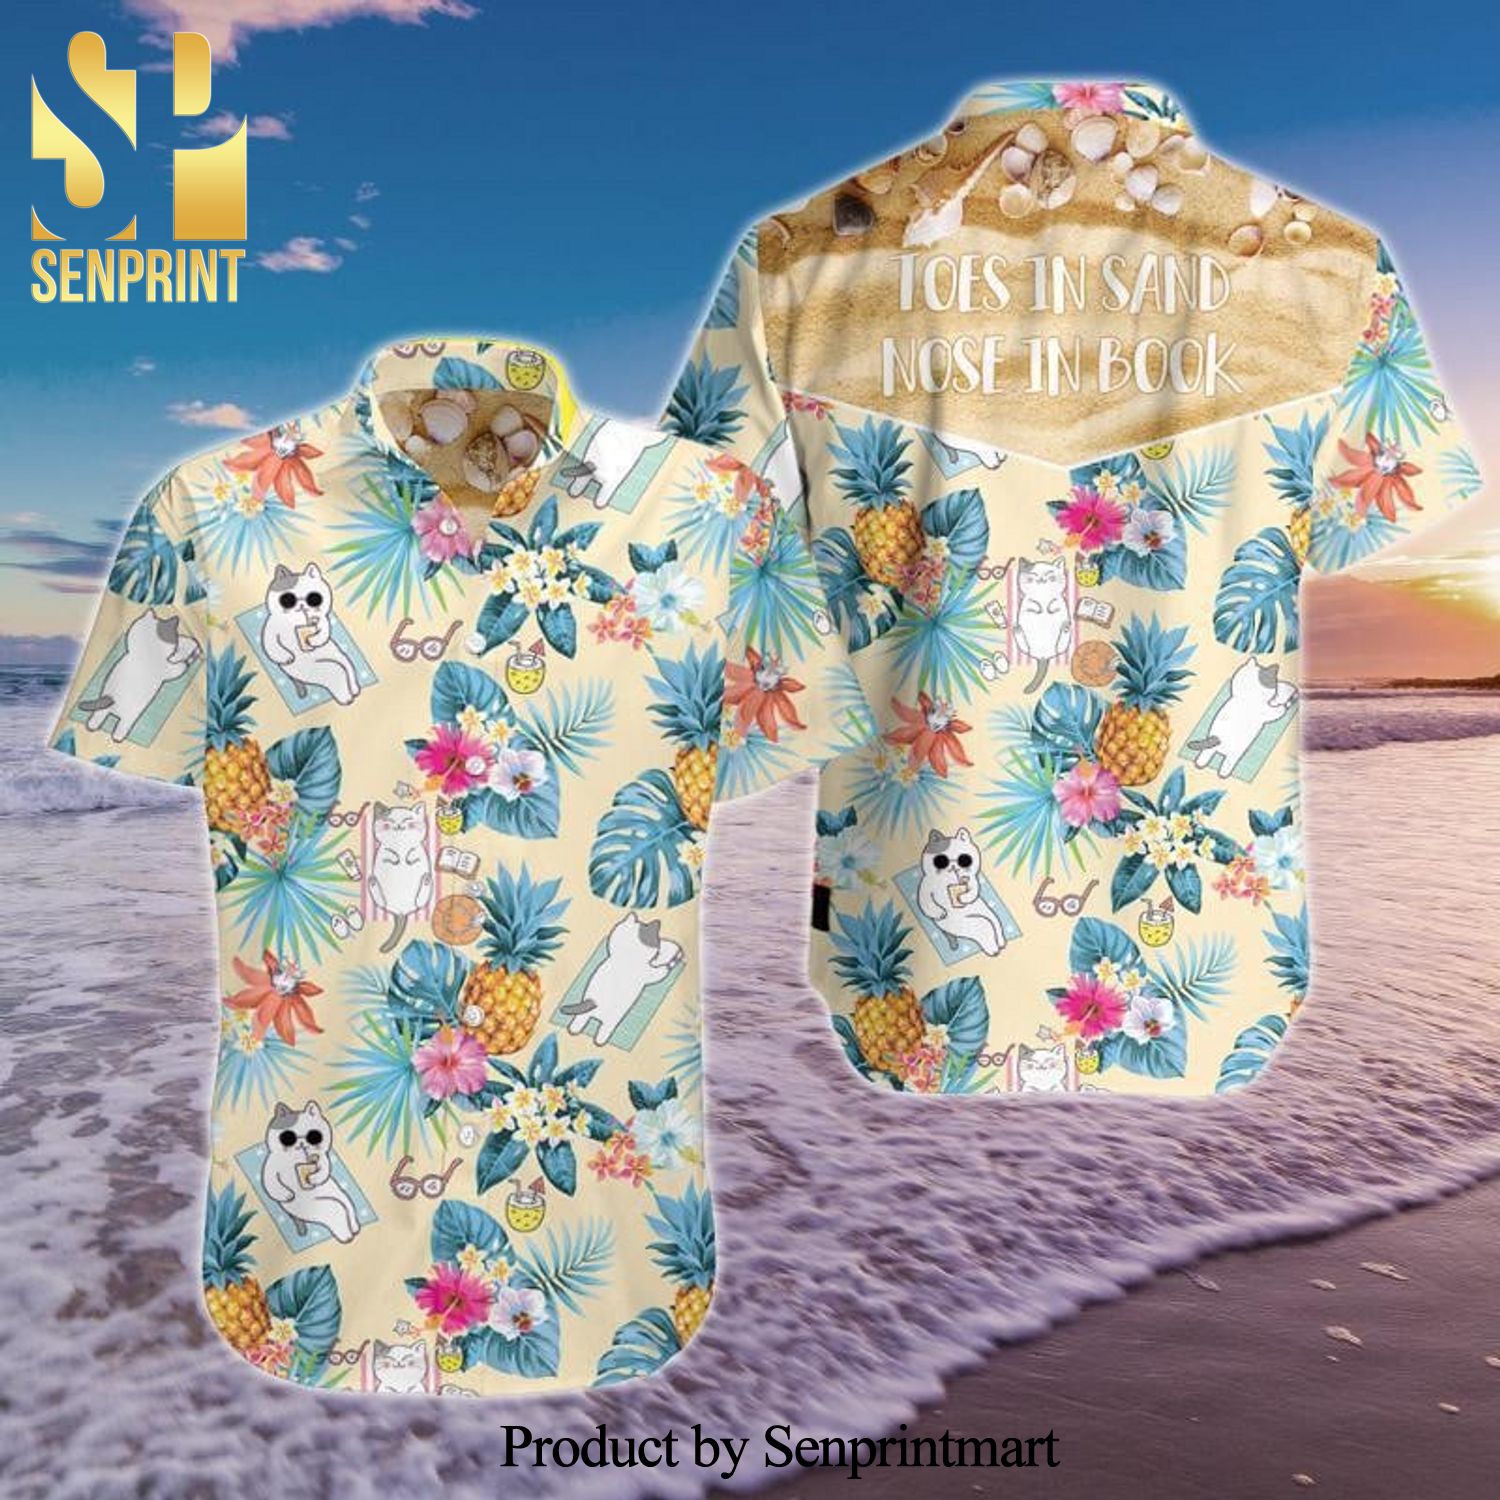 Toes in Sand Nose in Book Cat New Fashion Hawaiian Shirt